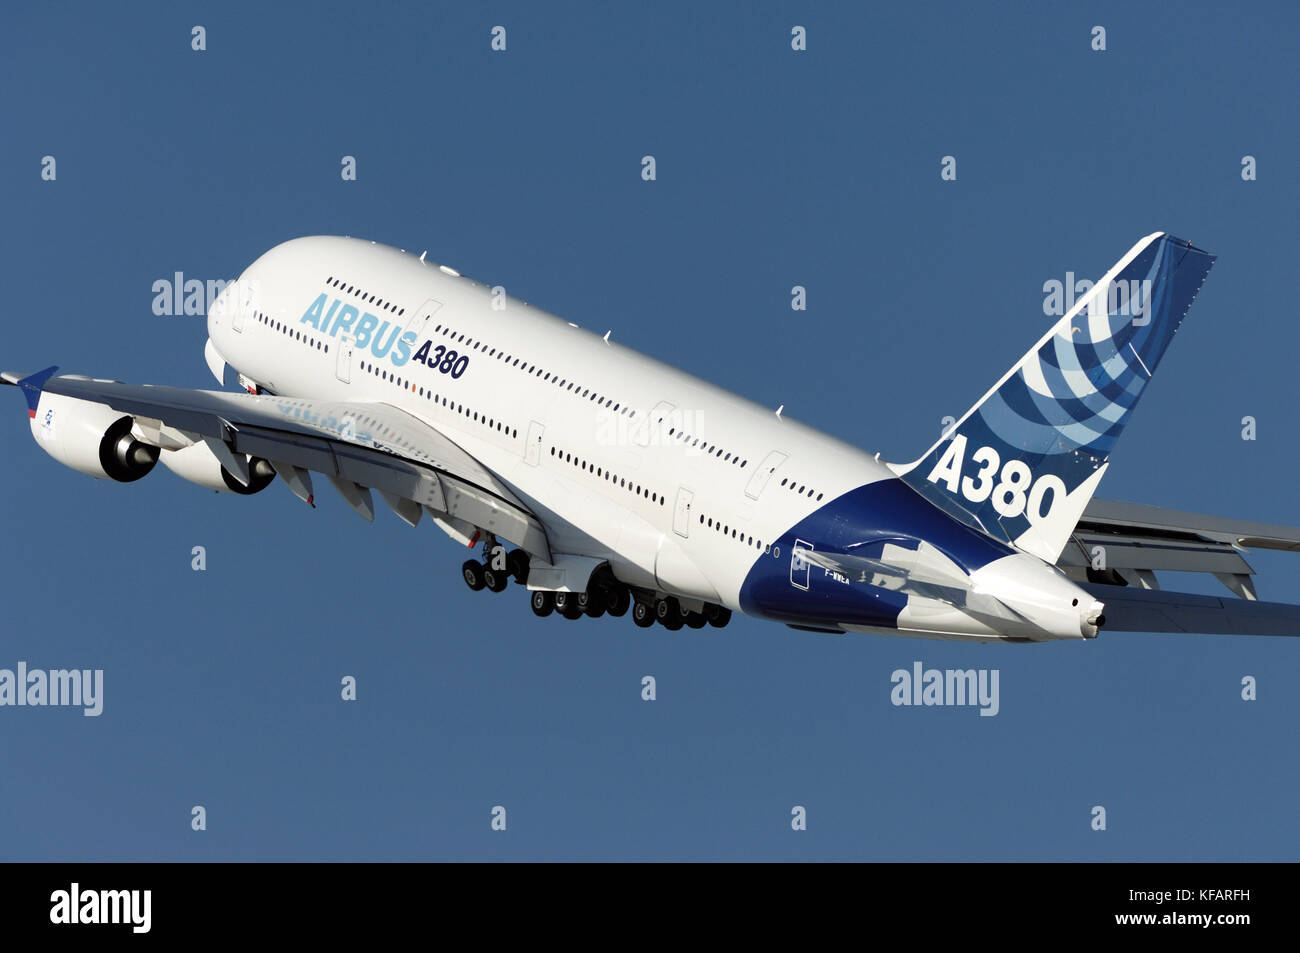 Airbus A380-800 climbing out after take-off at the Dubai AirShow 2007 Stock Photo